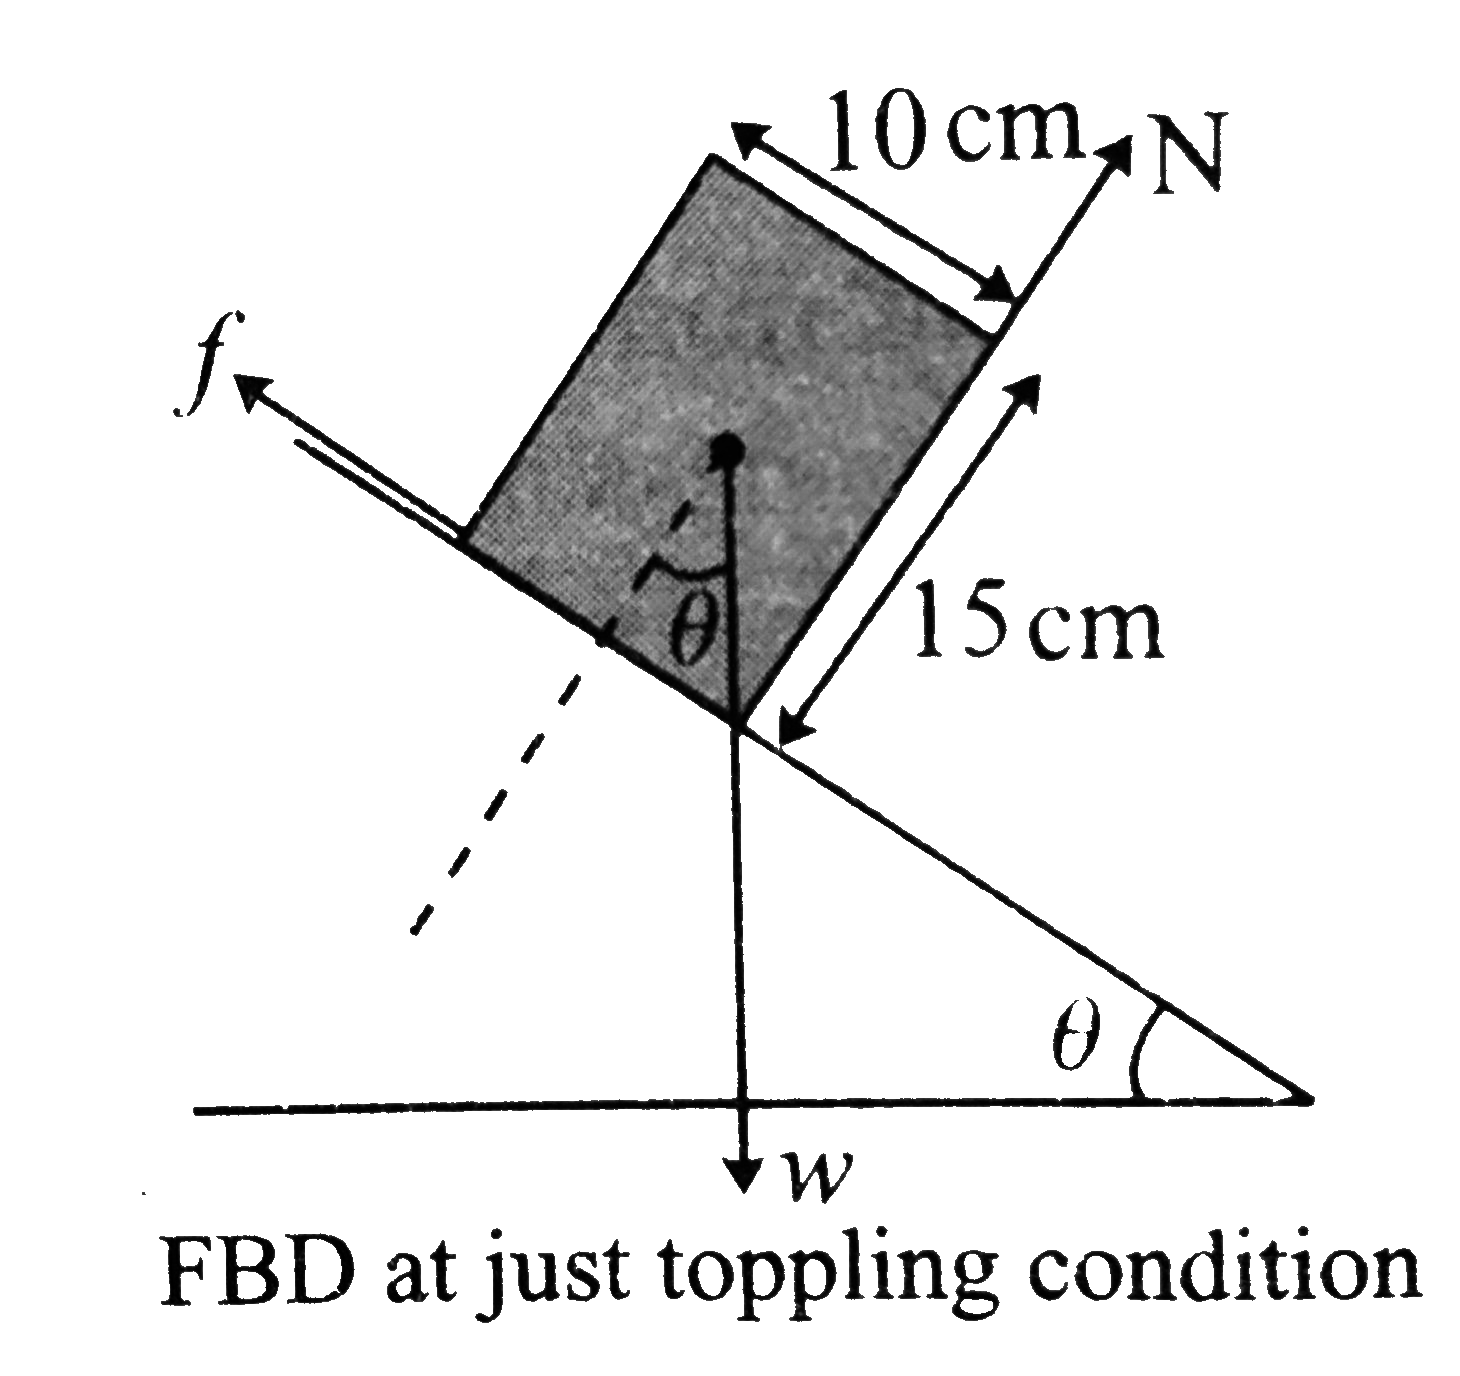 A block of base 10cmxx10cm and height 15 cm is kept on an inclind plane. The coefficient of friction between them is 3. The inclination theta of this inclined plane from the horizontal plane is gradually increased from 0^@. Then